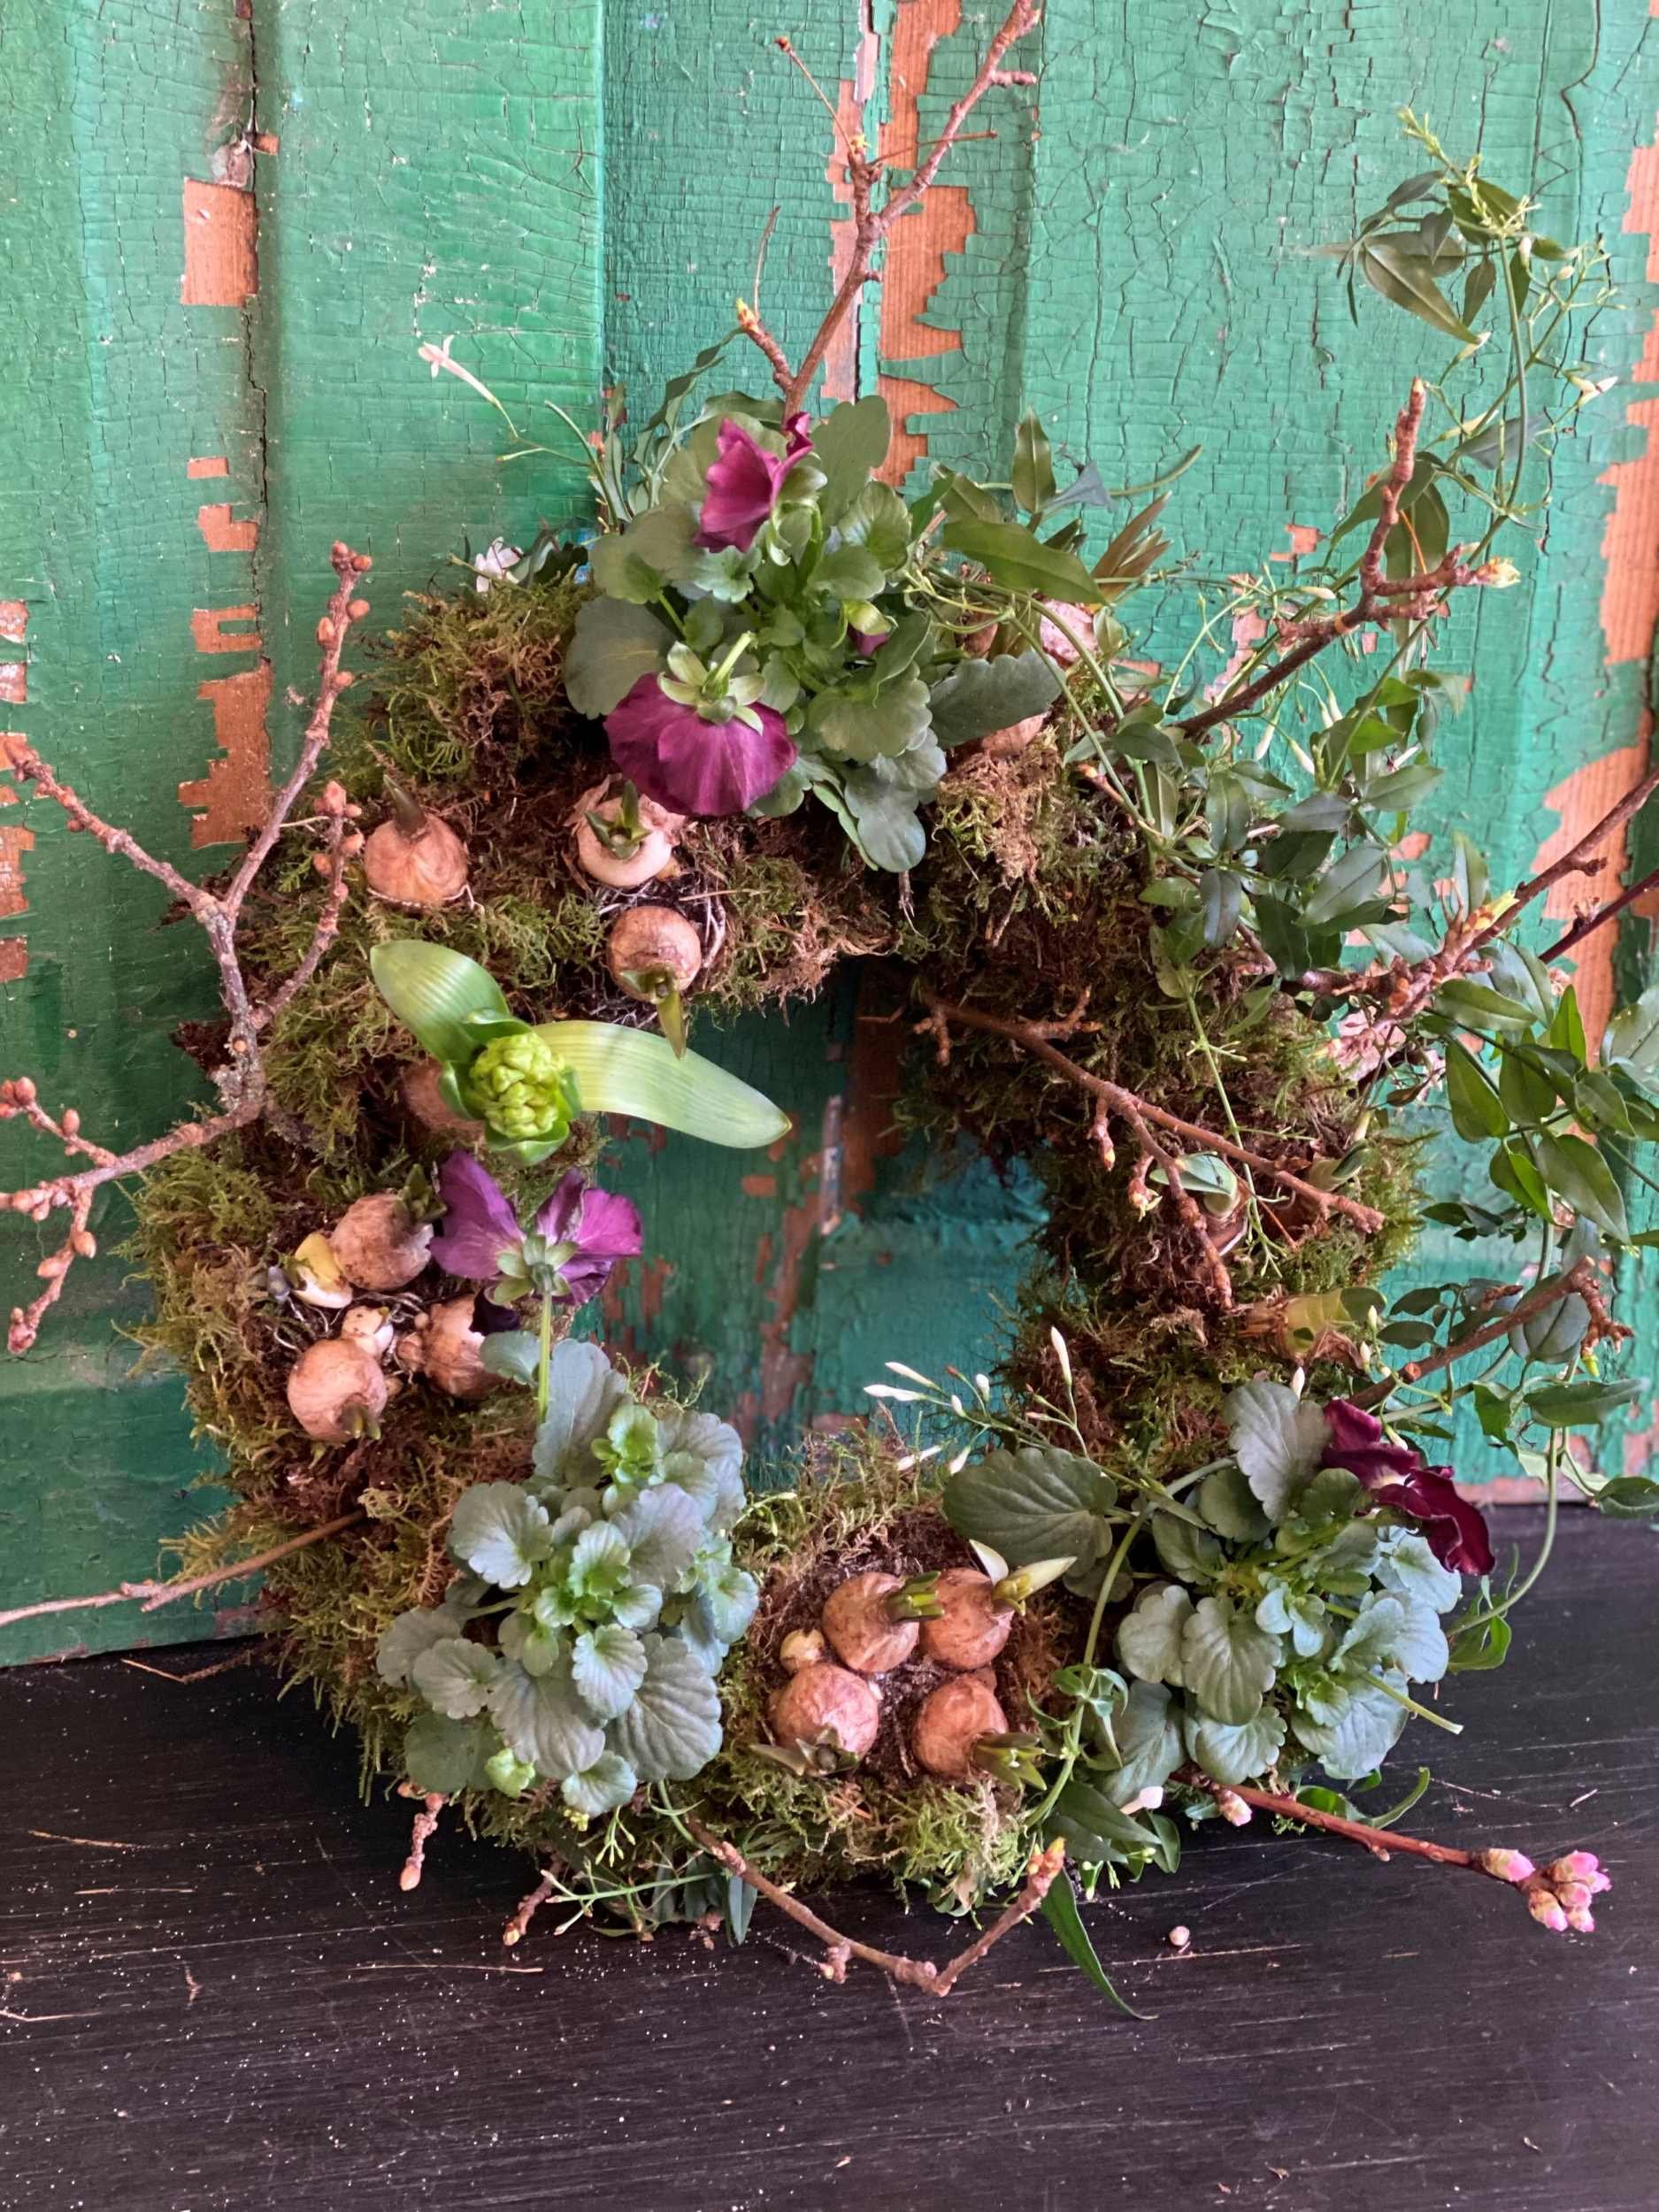 Mothers day living wreath places against a green door